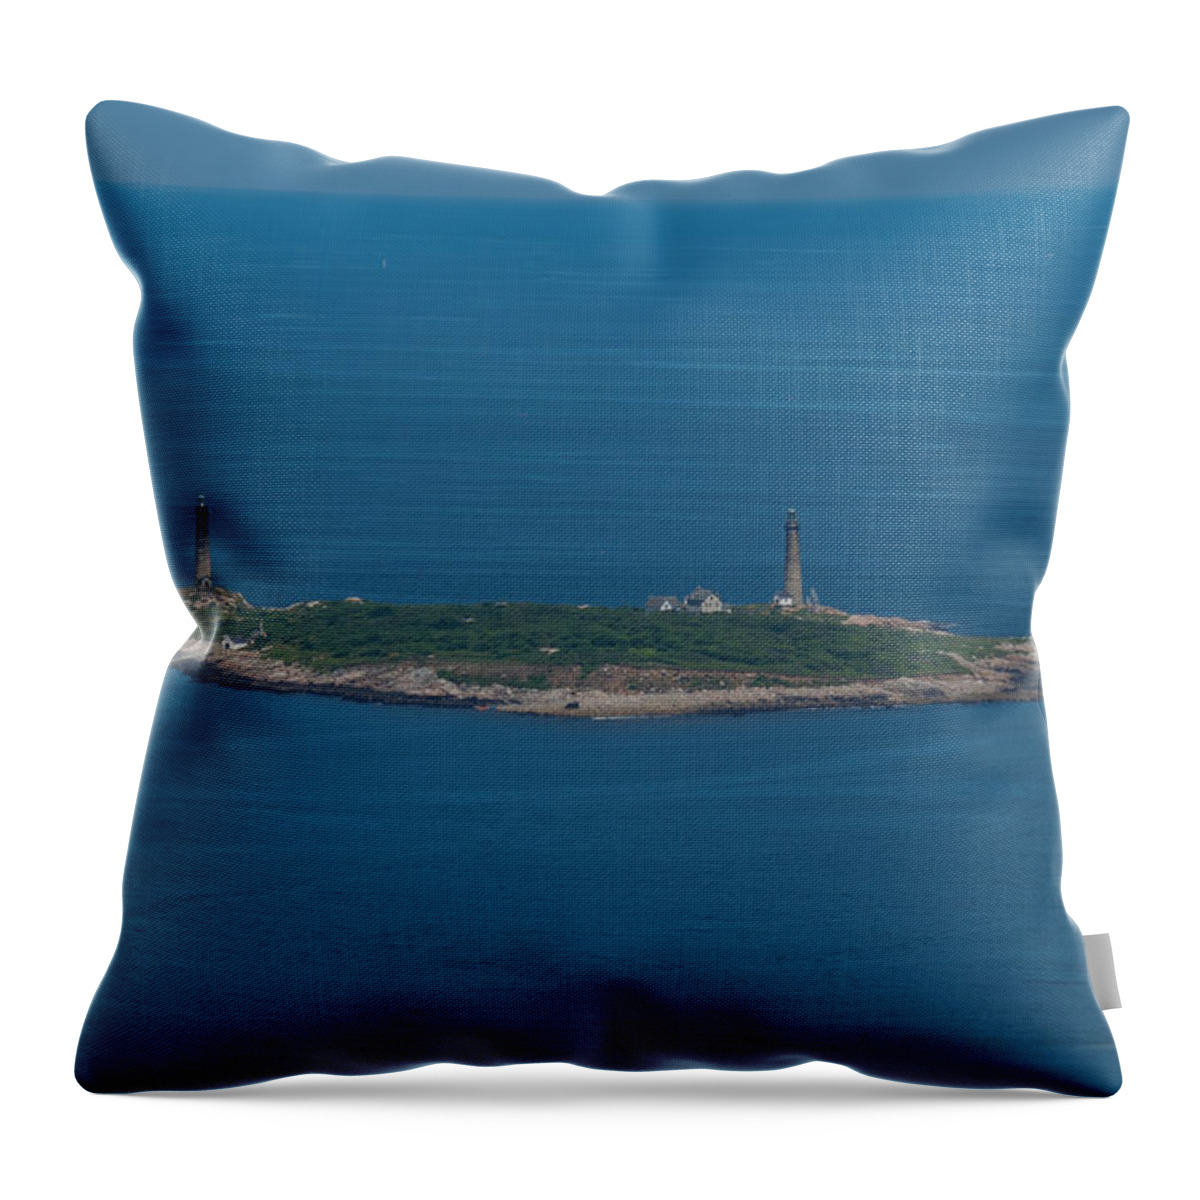 Thacher Island Throw Pillow featuring the photograph Thacher Island Lights by Joshua House